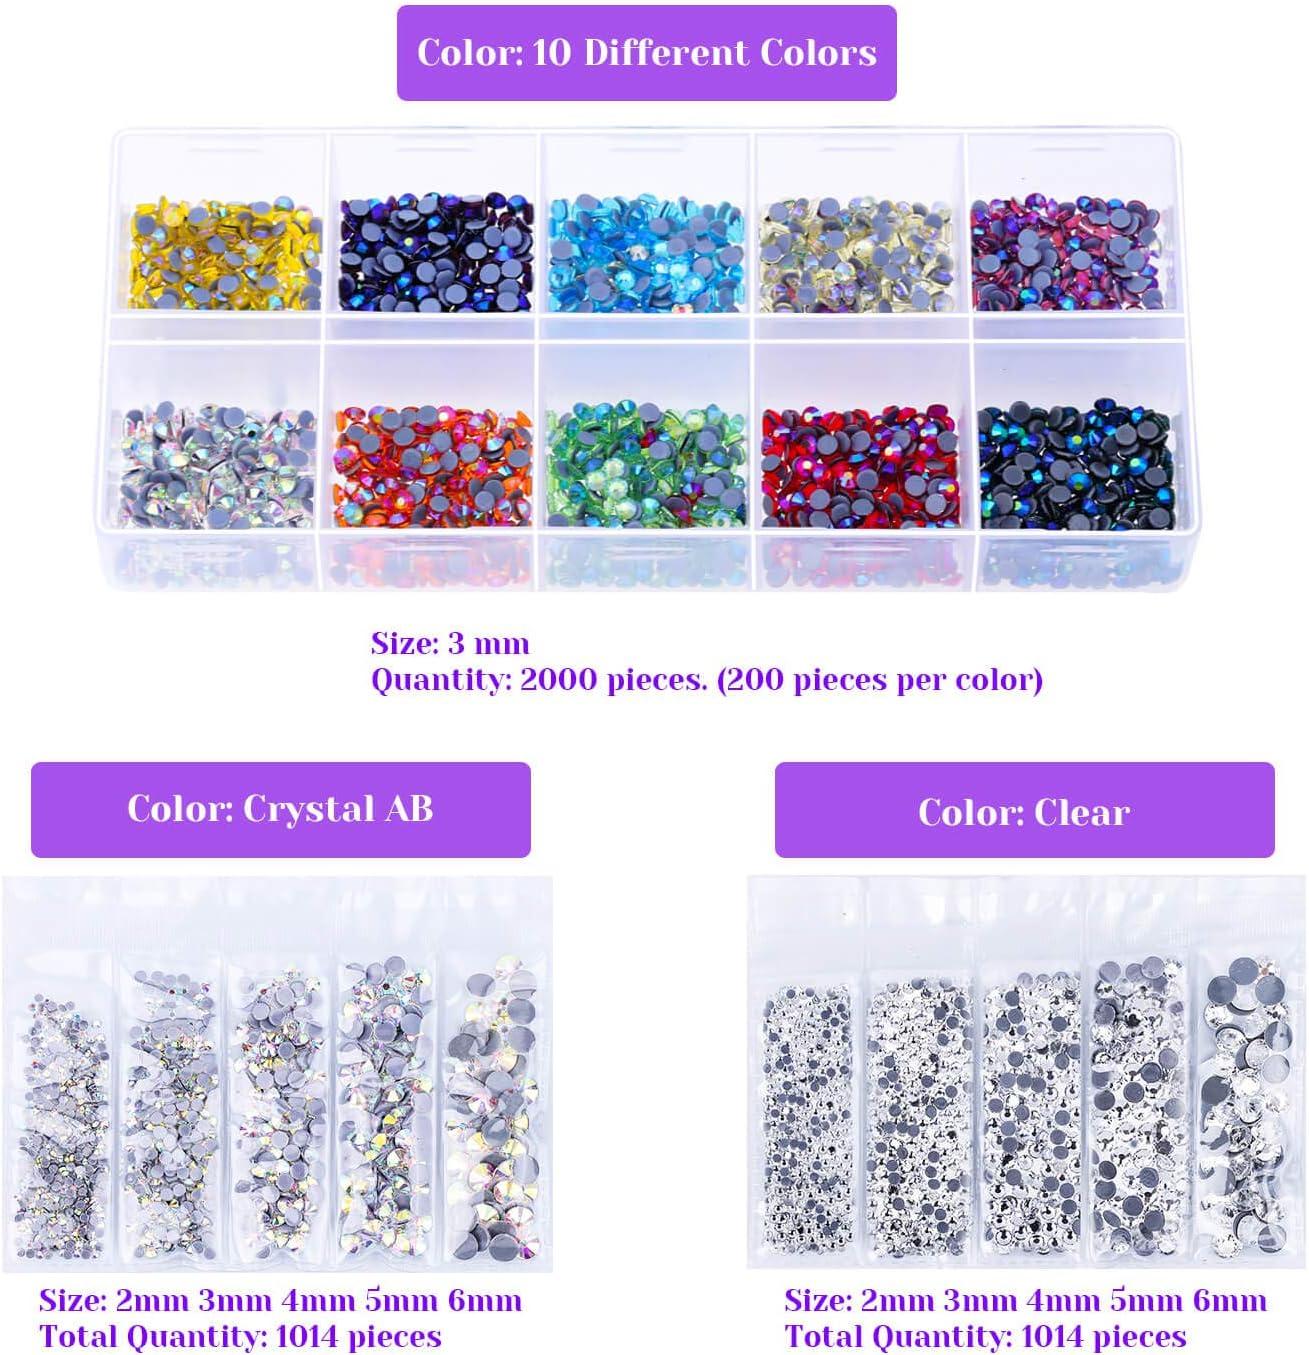 Hotfix Applicator with Rhinestones, Cridoz Hot Fix Rhinestone Applicator  Tool Kit with 4028Pcs Rhinestones, 7 Different Sizes Tips, Tweezers,  Rhinestone Picker Pens and Brush for Cloth Bedazzler Craft